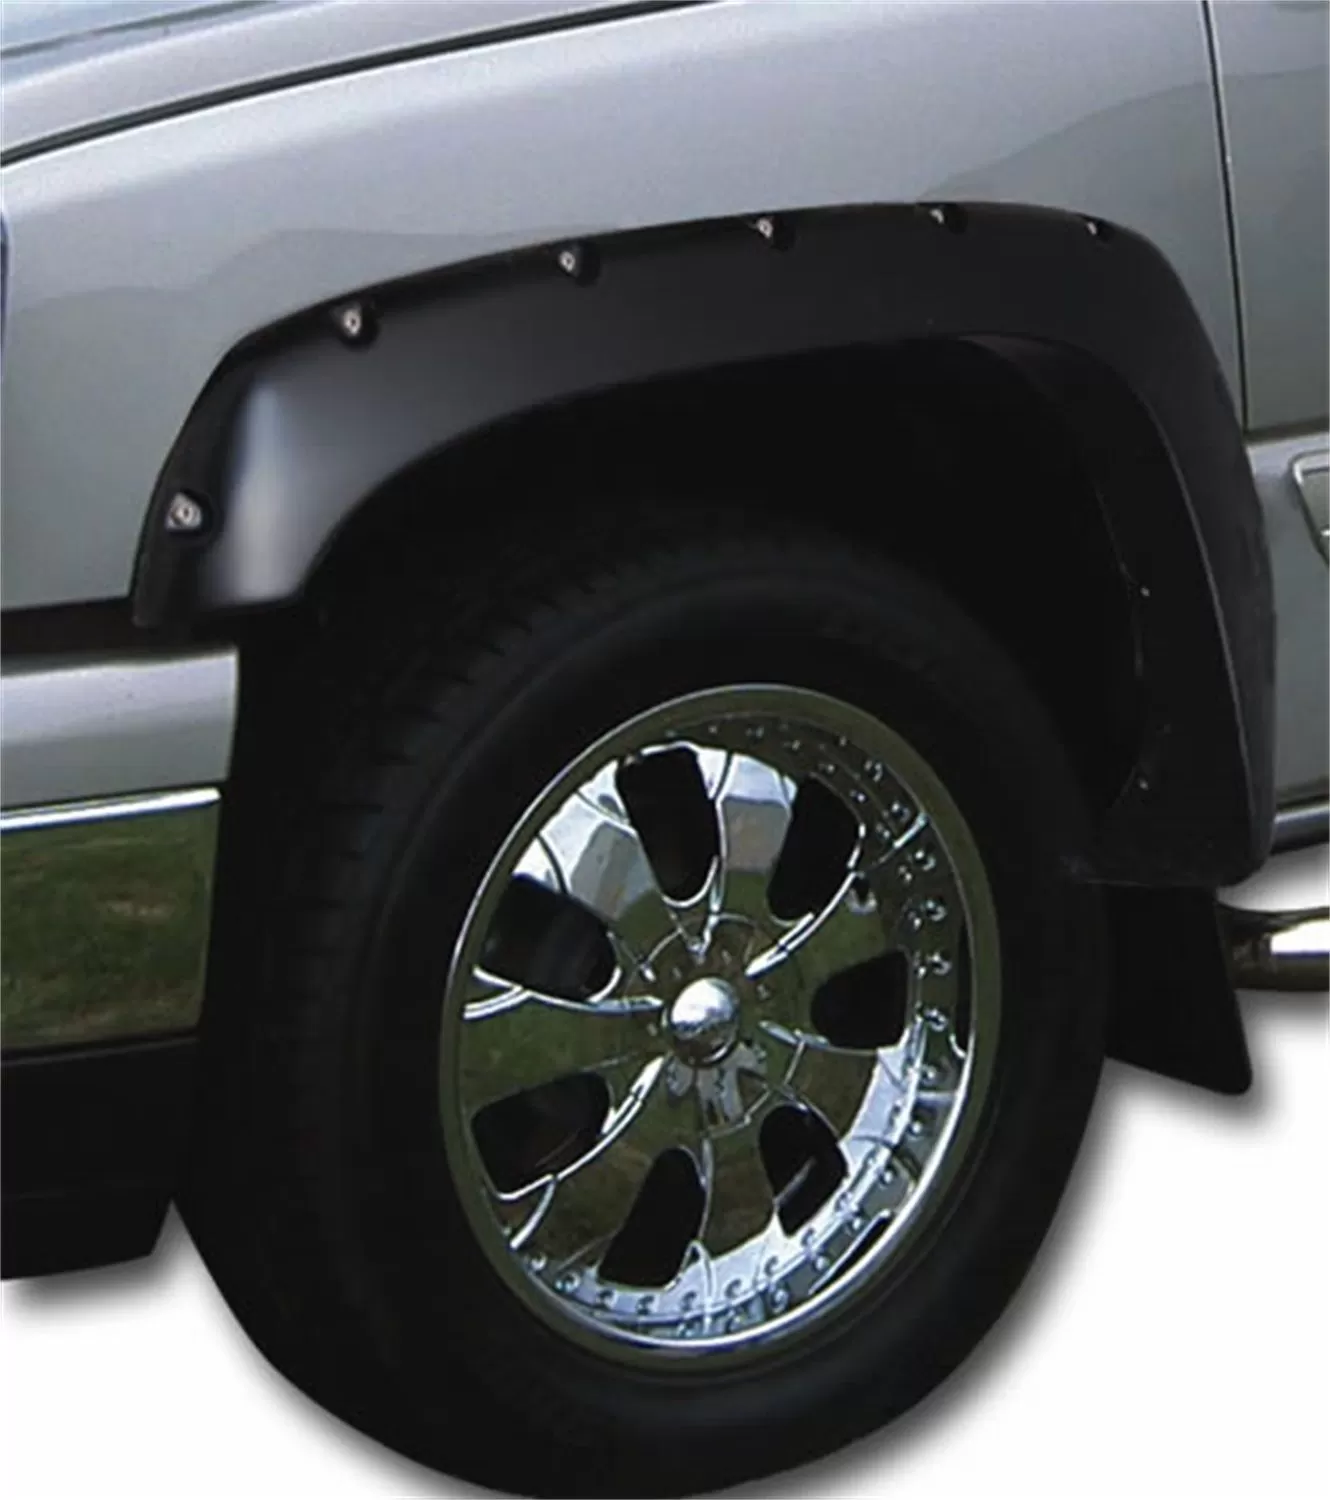 Stampede 66.0in Bed Black Ruff Riderz Textured Finish Fender Flare Ford F-150 2001-2003 - 8409-5